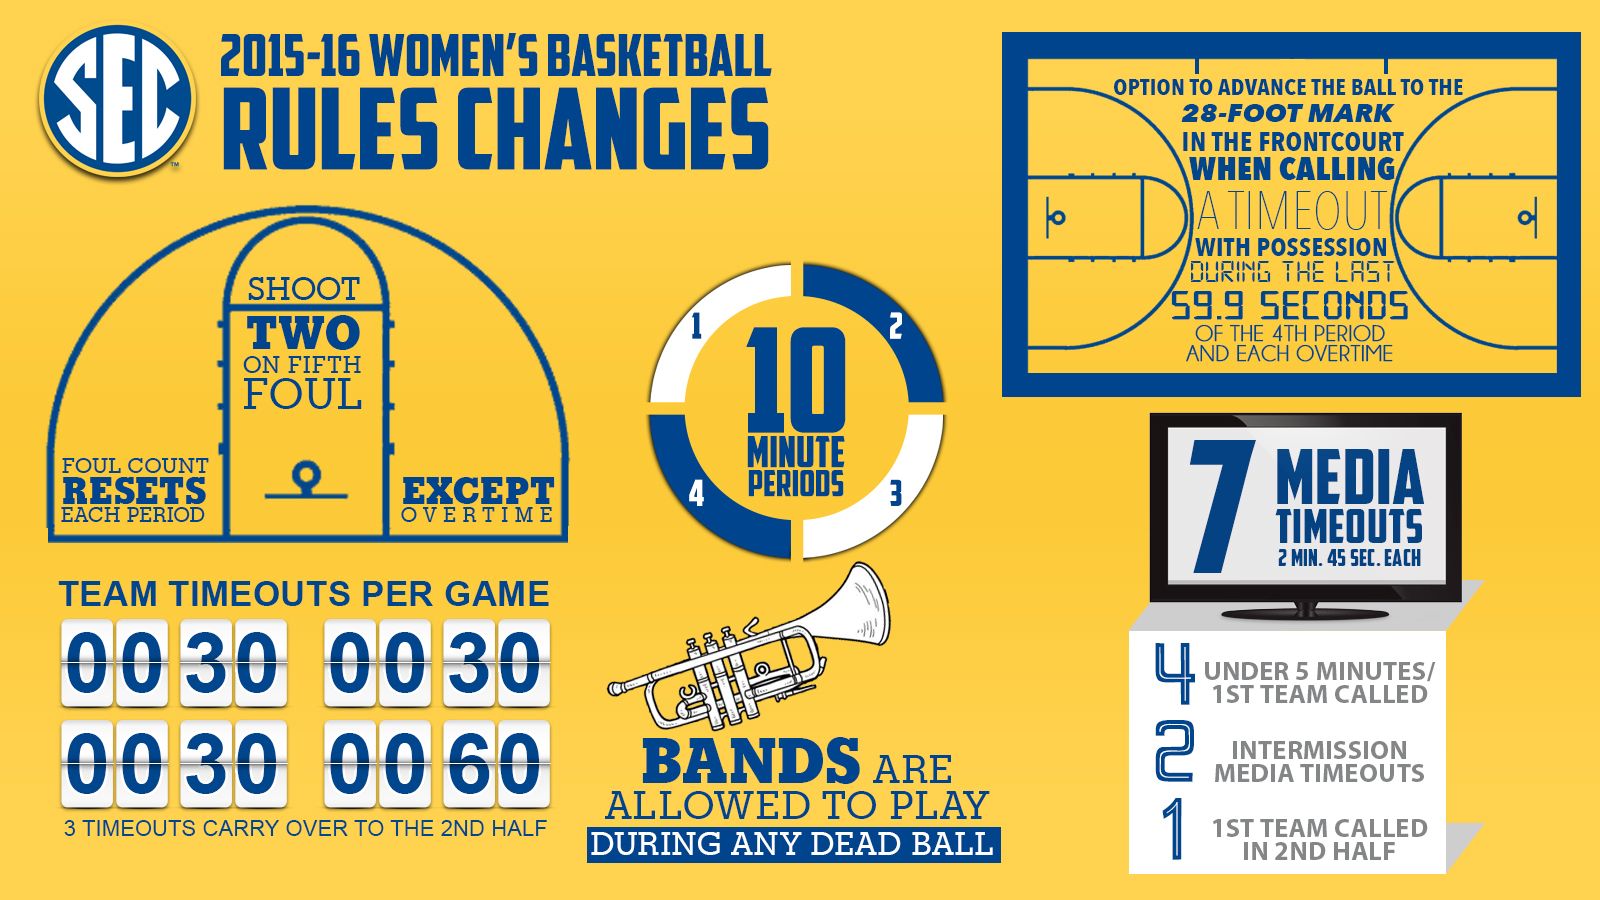 NCAA Women's Basketball rules changes